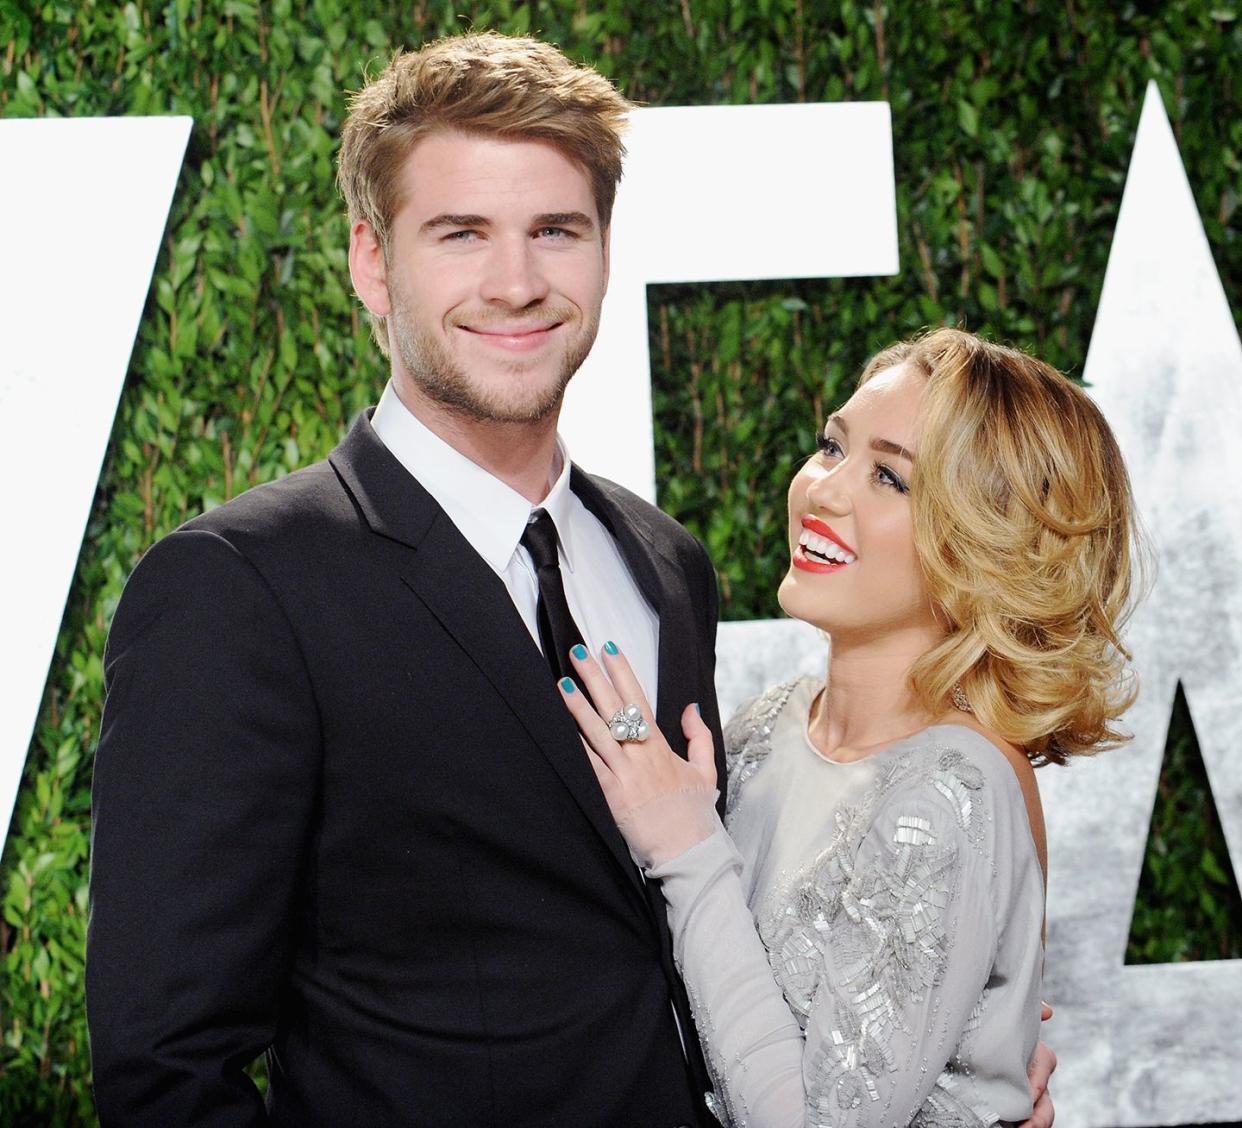 west hollywood, ca february 26 actor liam hemsworth and actresssinger miley cyrus arrive at the 2012 vanity fair oscar party at sunset tower on february 26, 2012 in west hollywood, california photo by jon kopalofffilmmagic